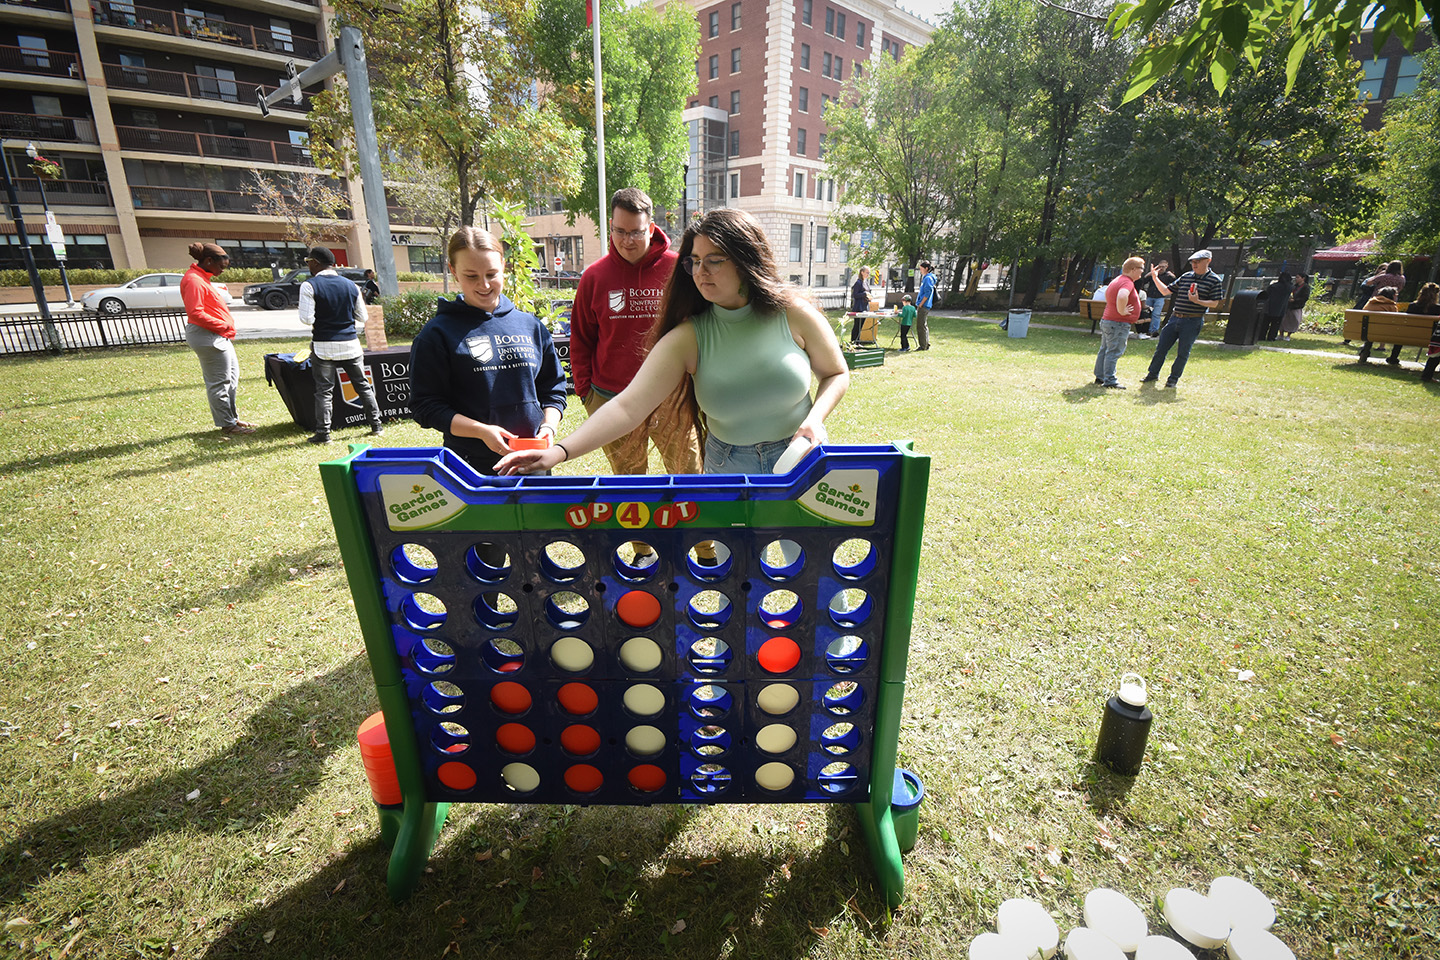 Students play a jumbo-sized game on the campus lawn during an event.